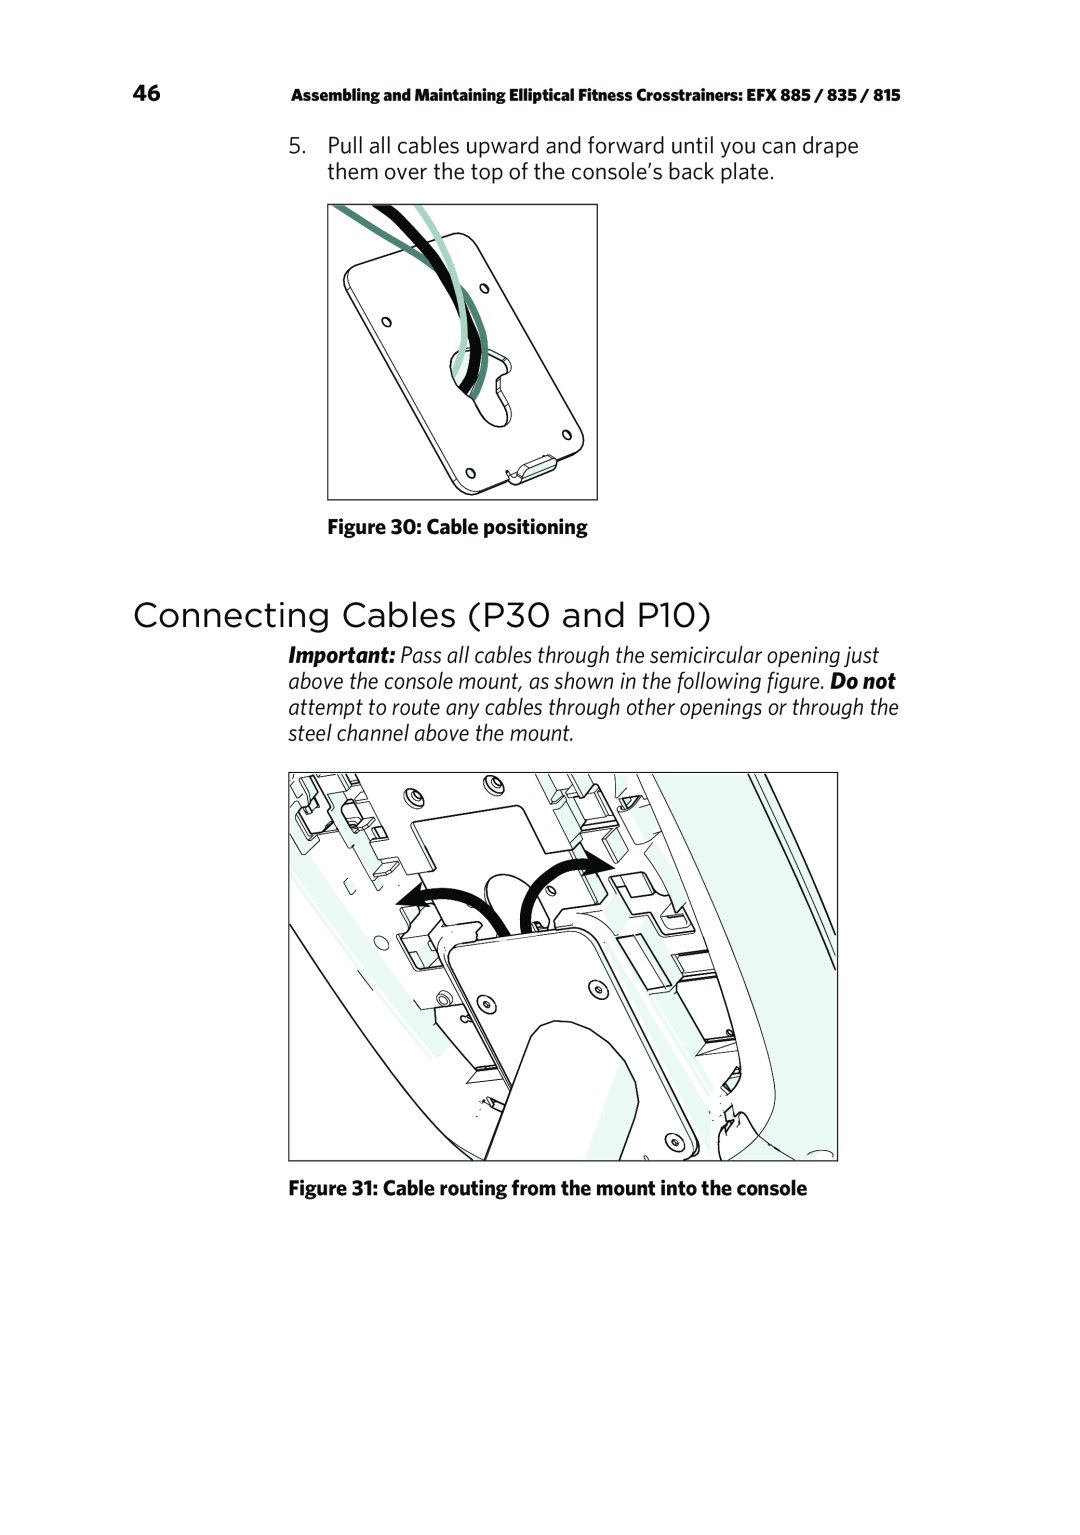 Precor P80 manual Connecting Cables P30 and P10, Cable positioning 